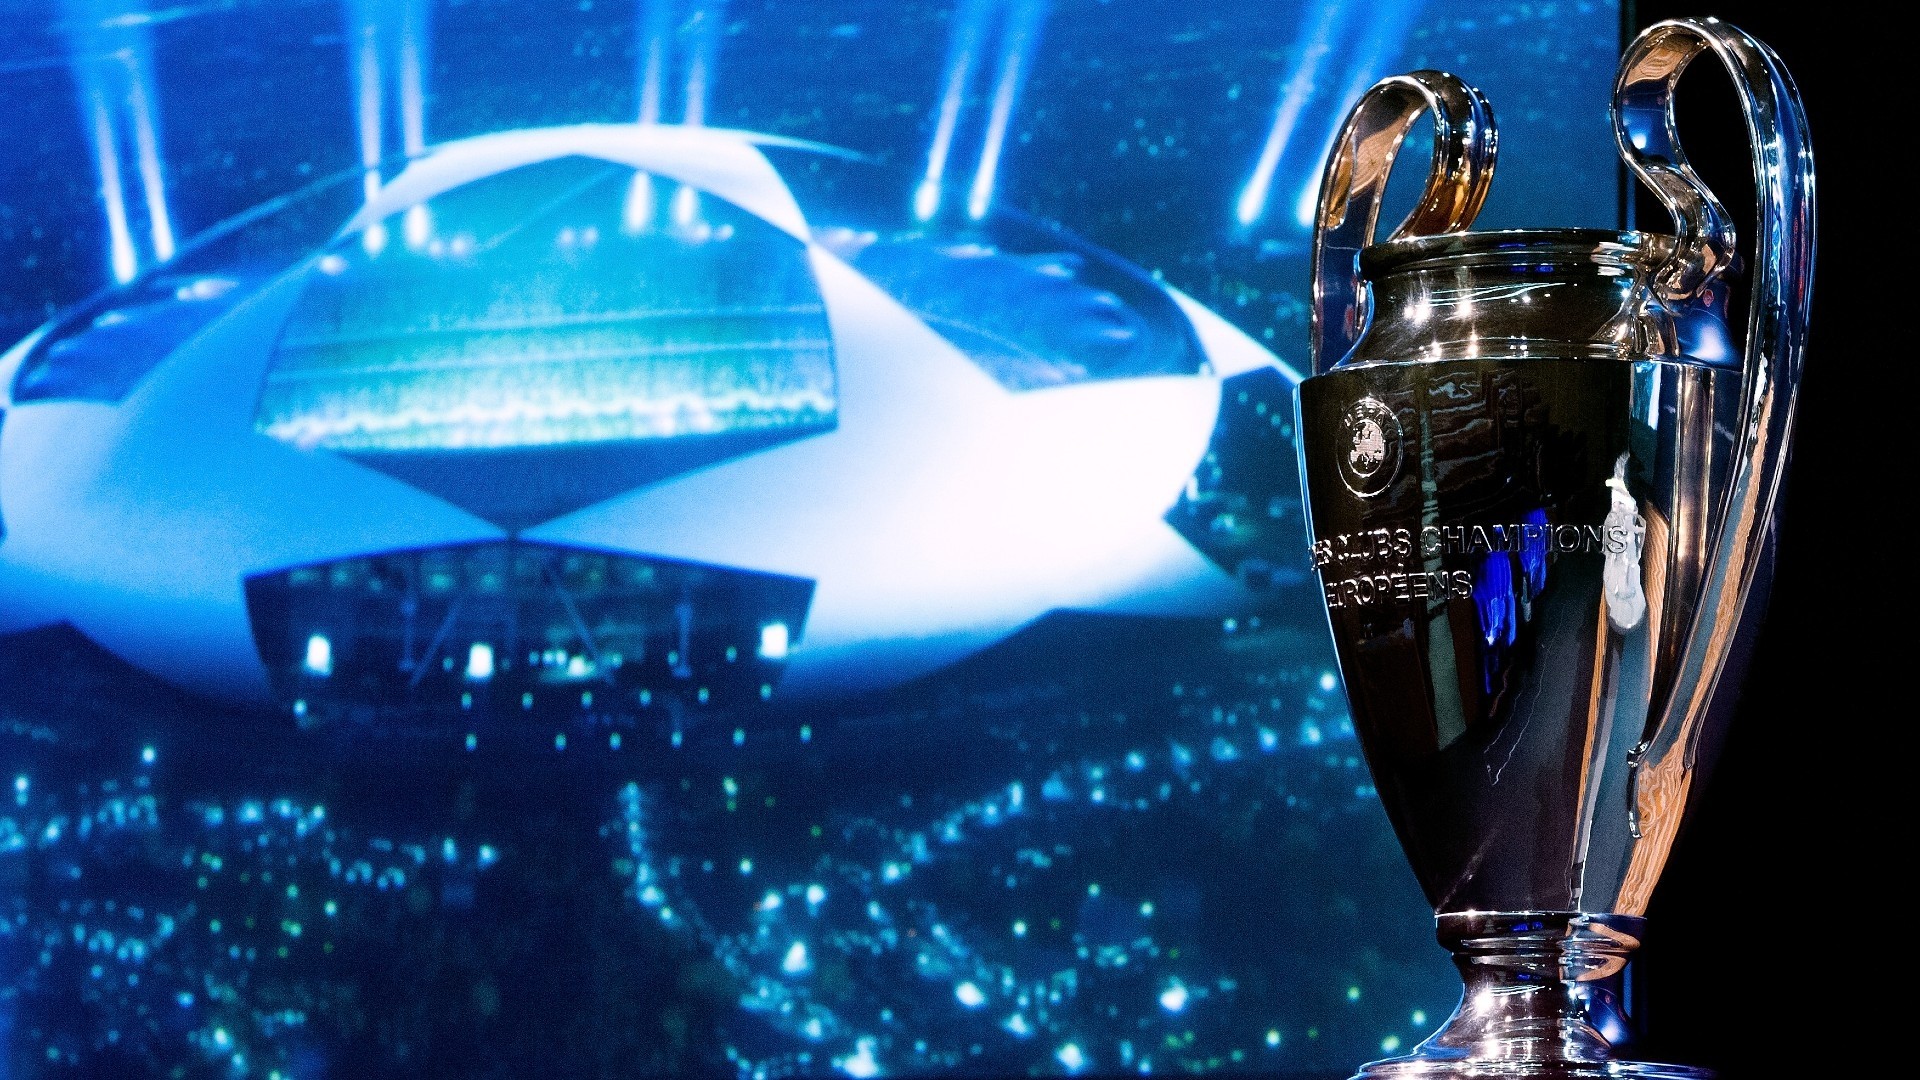 010822_The_UEFA_Champions_League_trophy_is_displayed_in_the_draw_room_1920.jpg